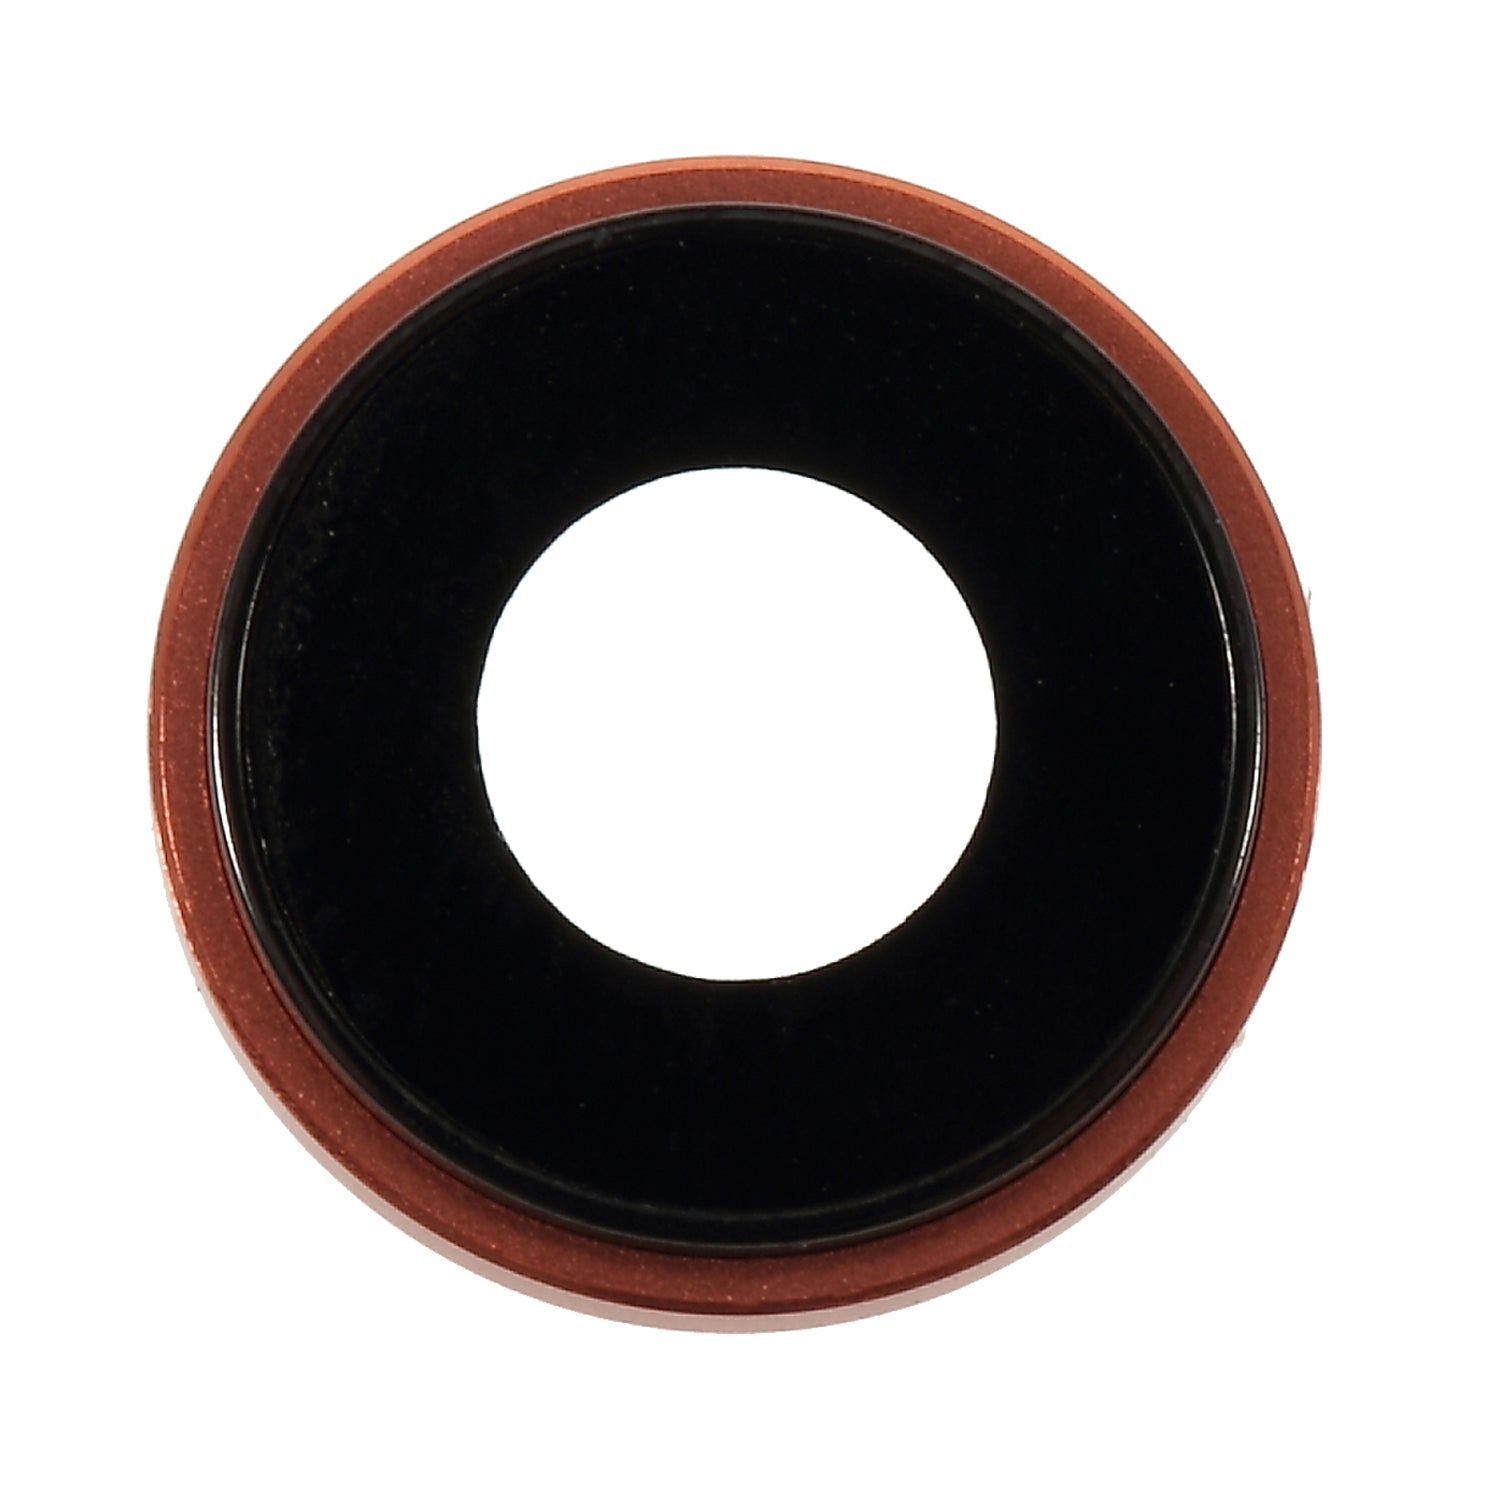 Rear Camera Lens Ring Cover with Glass Lens for iPhone XR 6.1 inch - Orange